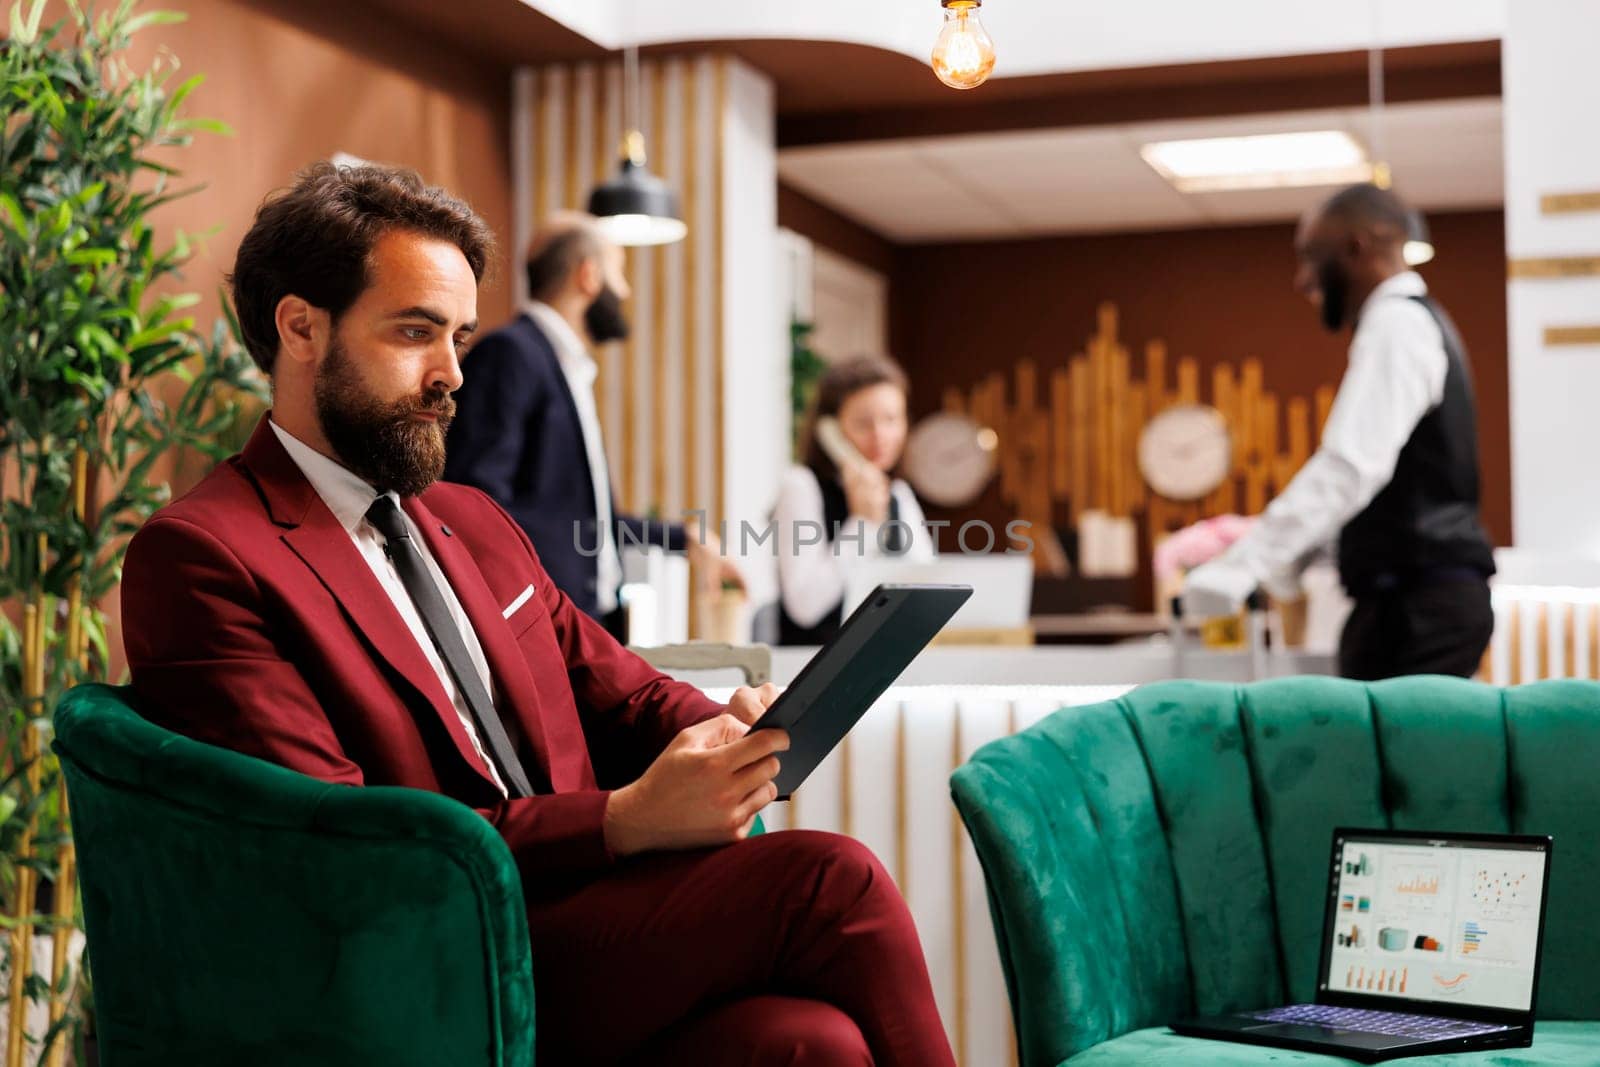 Employee looks over meeting notes waiting to do check in before attending important international conference. Young businessman at hotel travelling for work, reading documents in lobby.